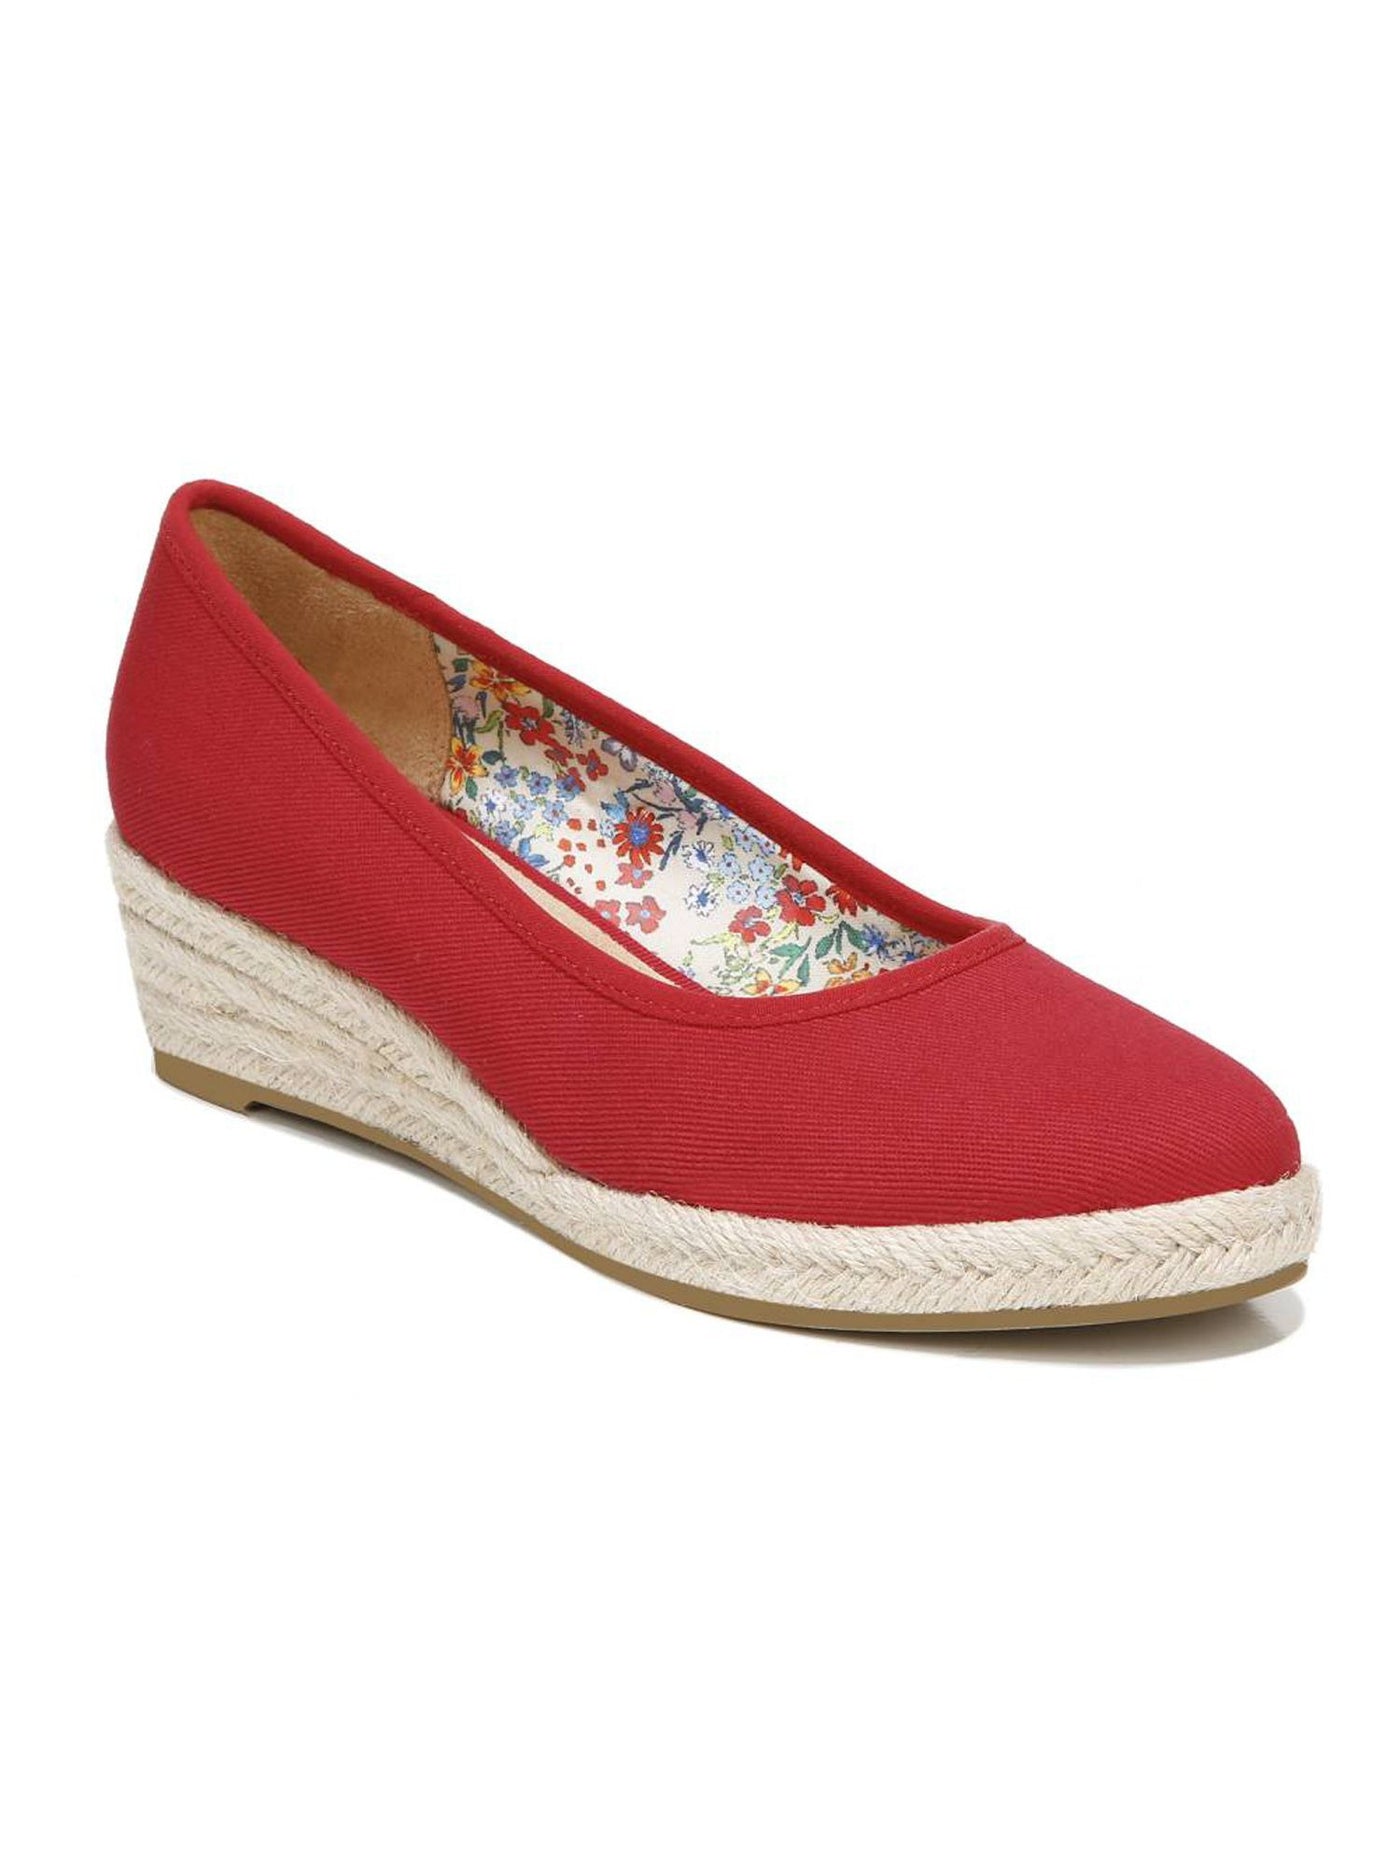 LIFE STRIDE Womens Red 1/2" Platform Traction Sole Jute Wrapped Cushioned Karma Round Toe Wedge Slip On Espadrille Shoes 8.5 W